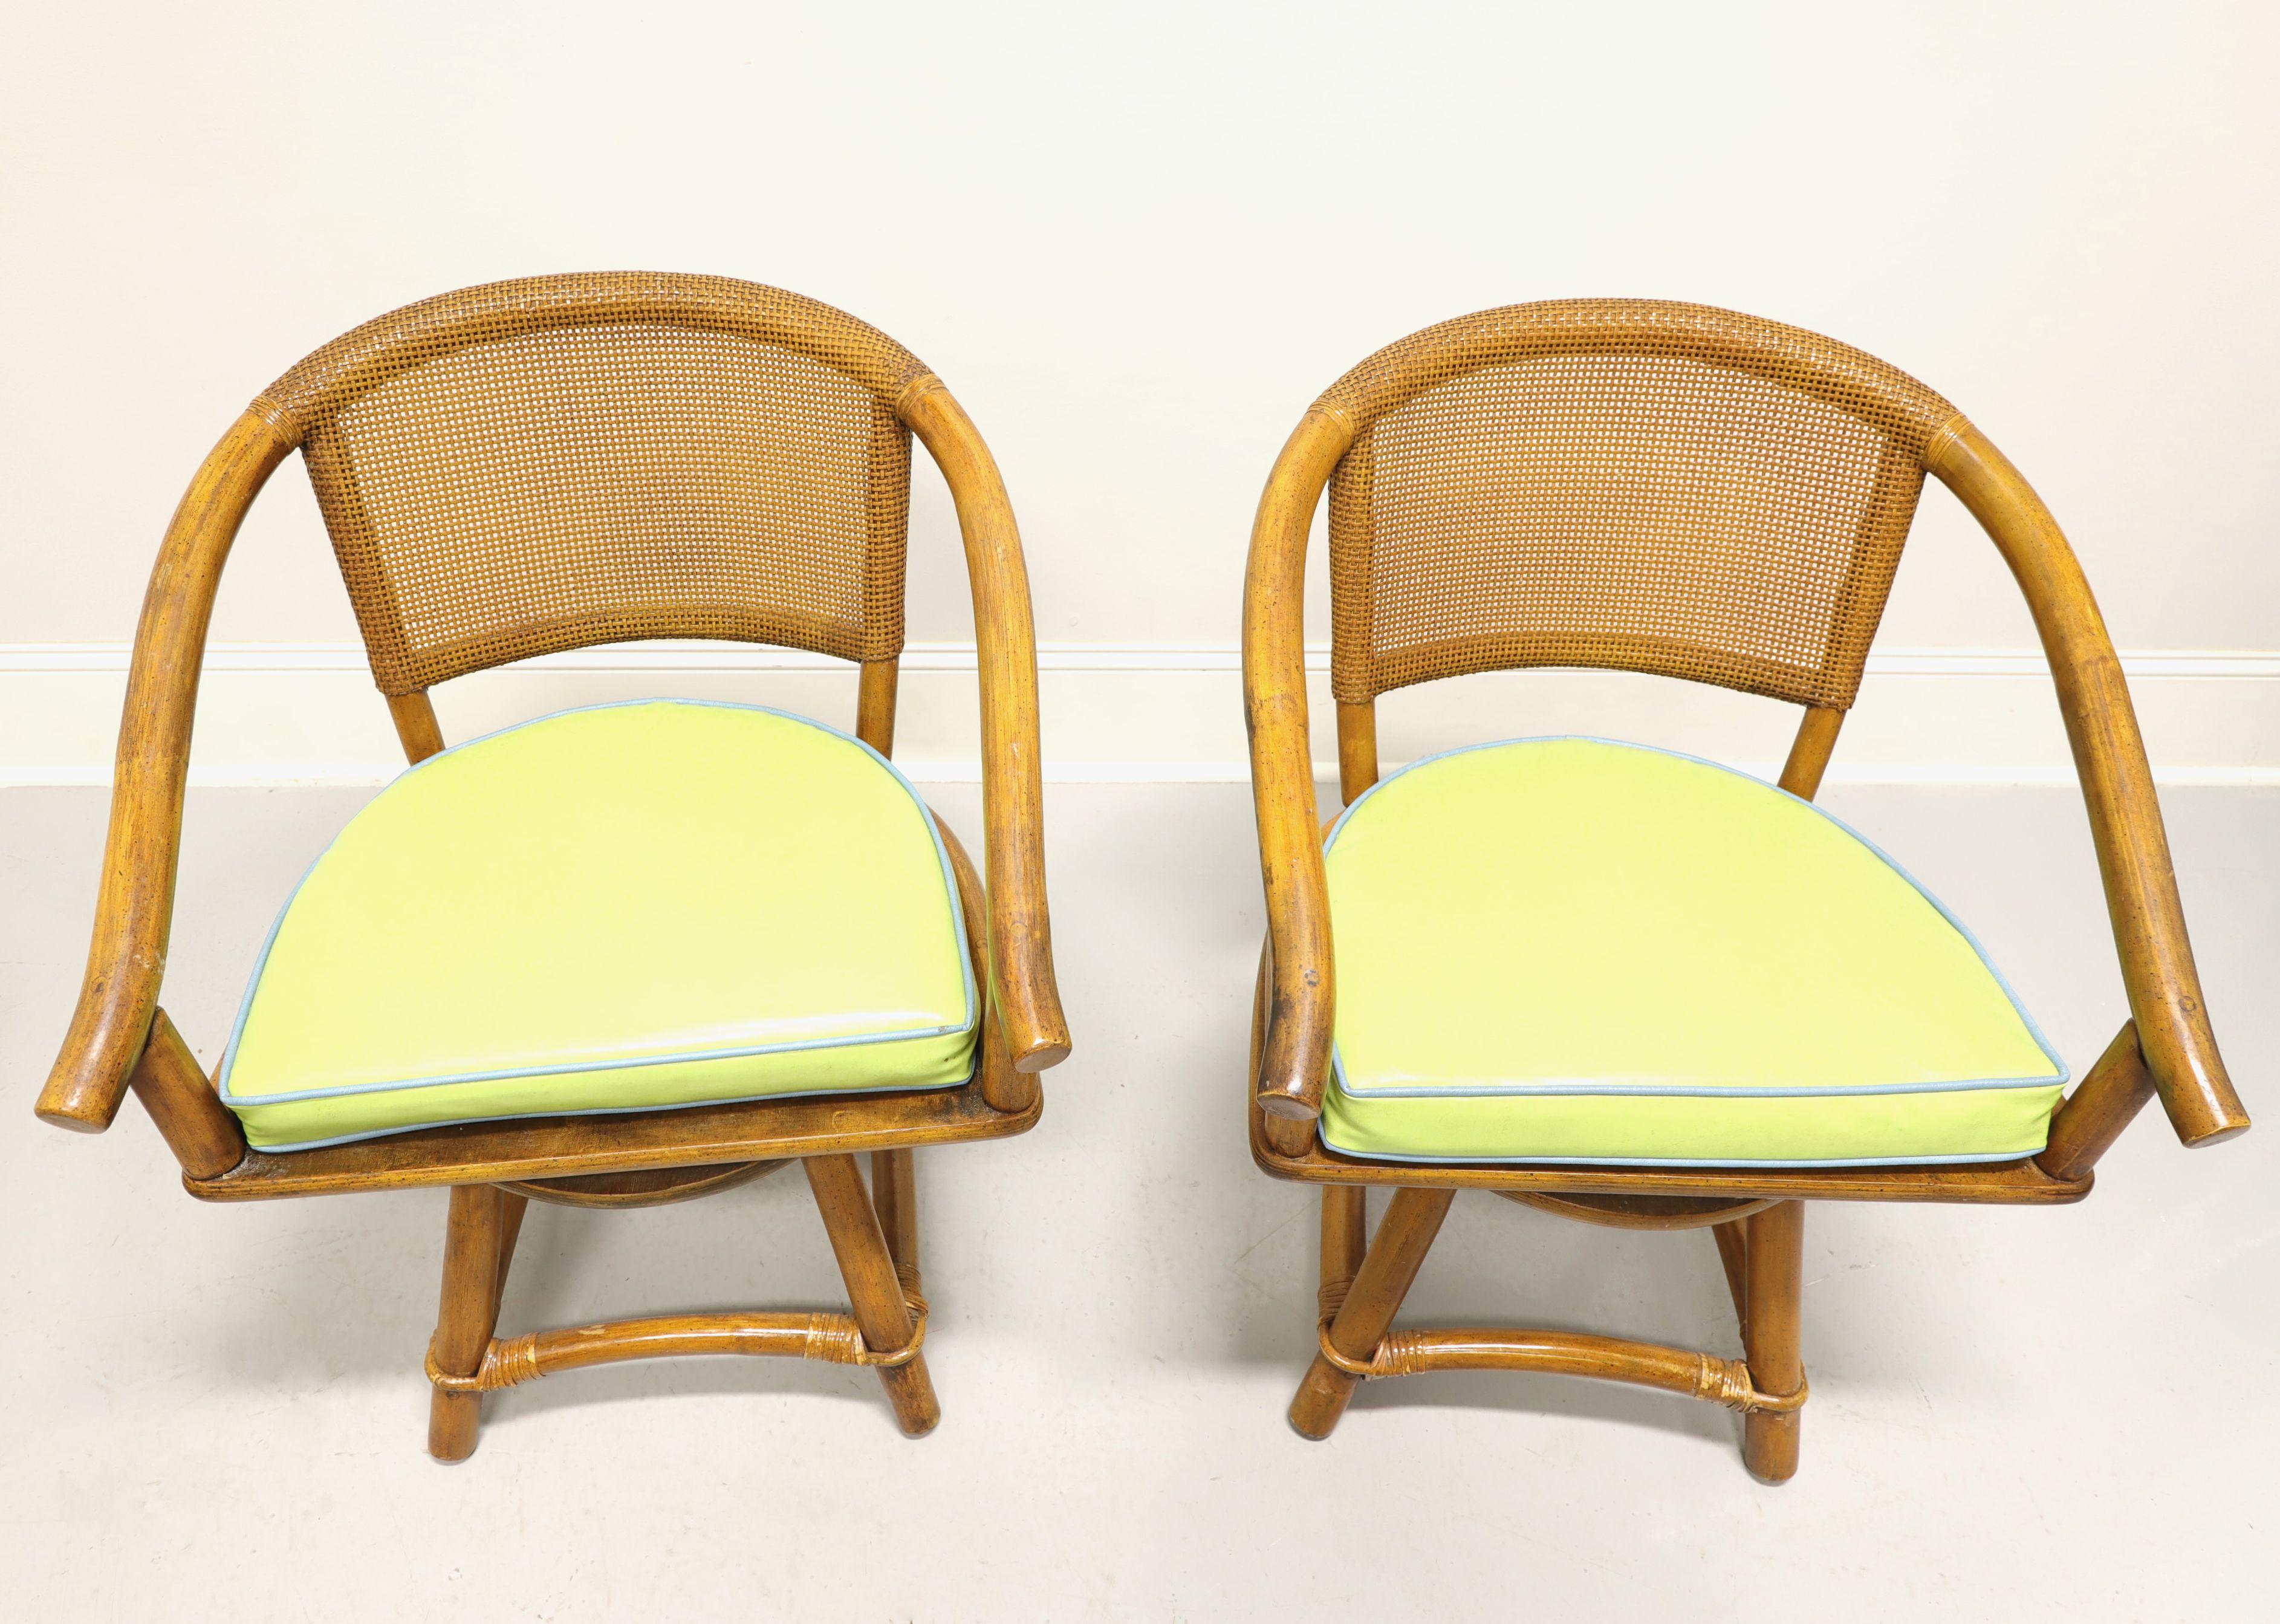 A pair of mid-20th century Coastal style swivel seat armchairs by Ficks Reed. Faux bamboo frame, cane backrest, rattan strapping, downward sloping curved arms, return-to-front swivel seat mechanism, plain wood seat meant to be used with a cushion,